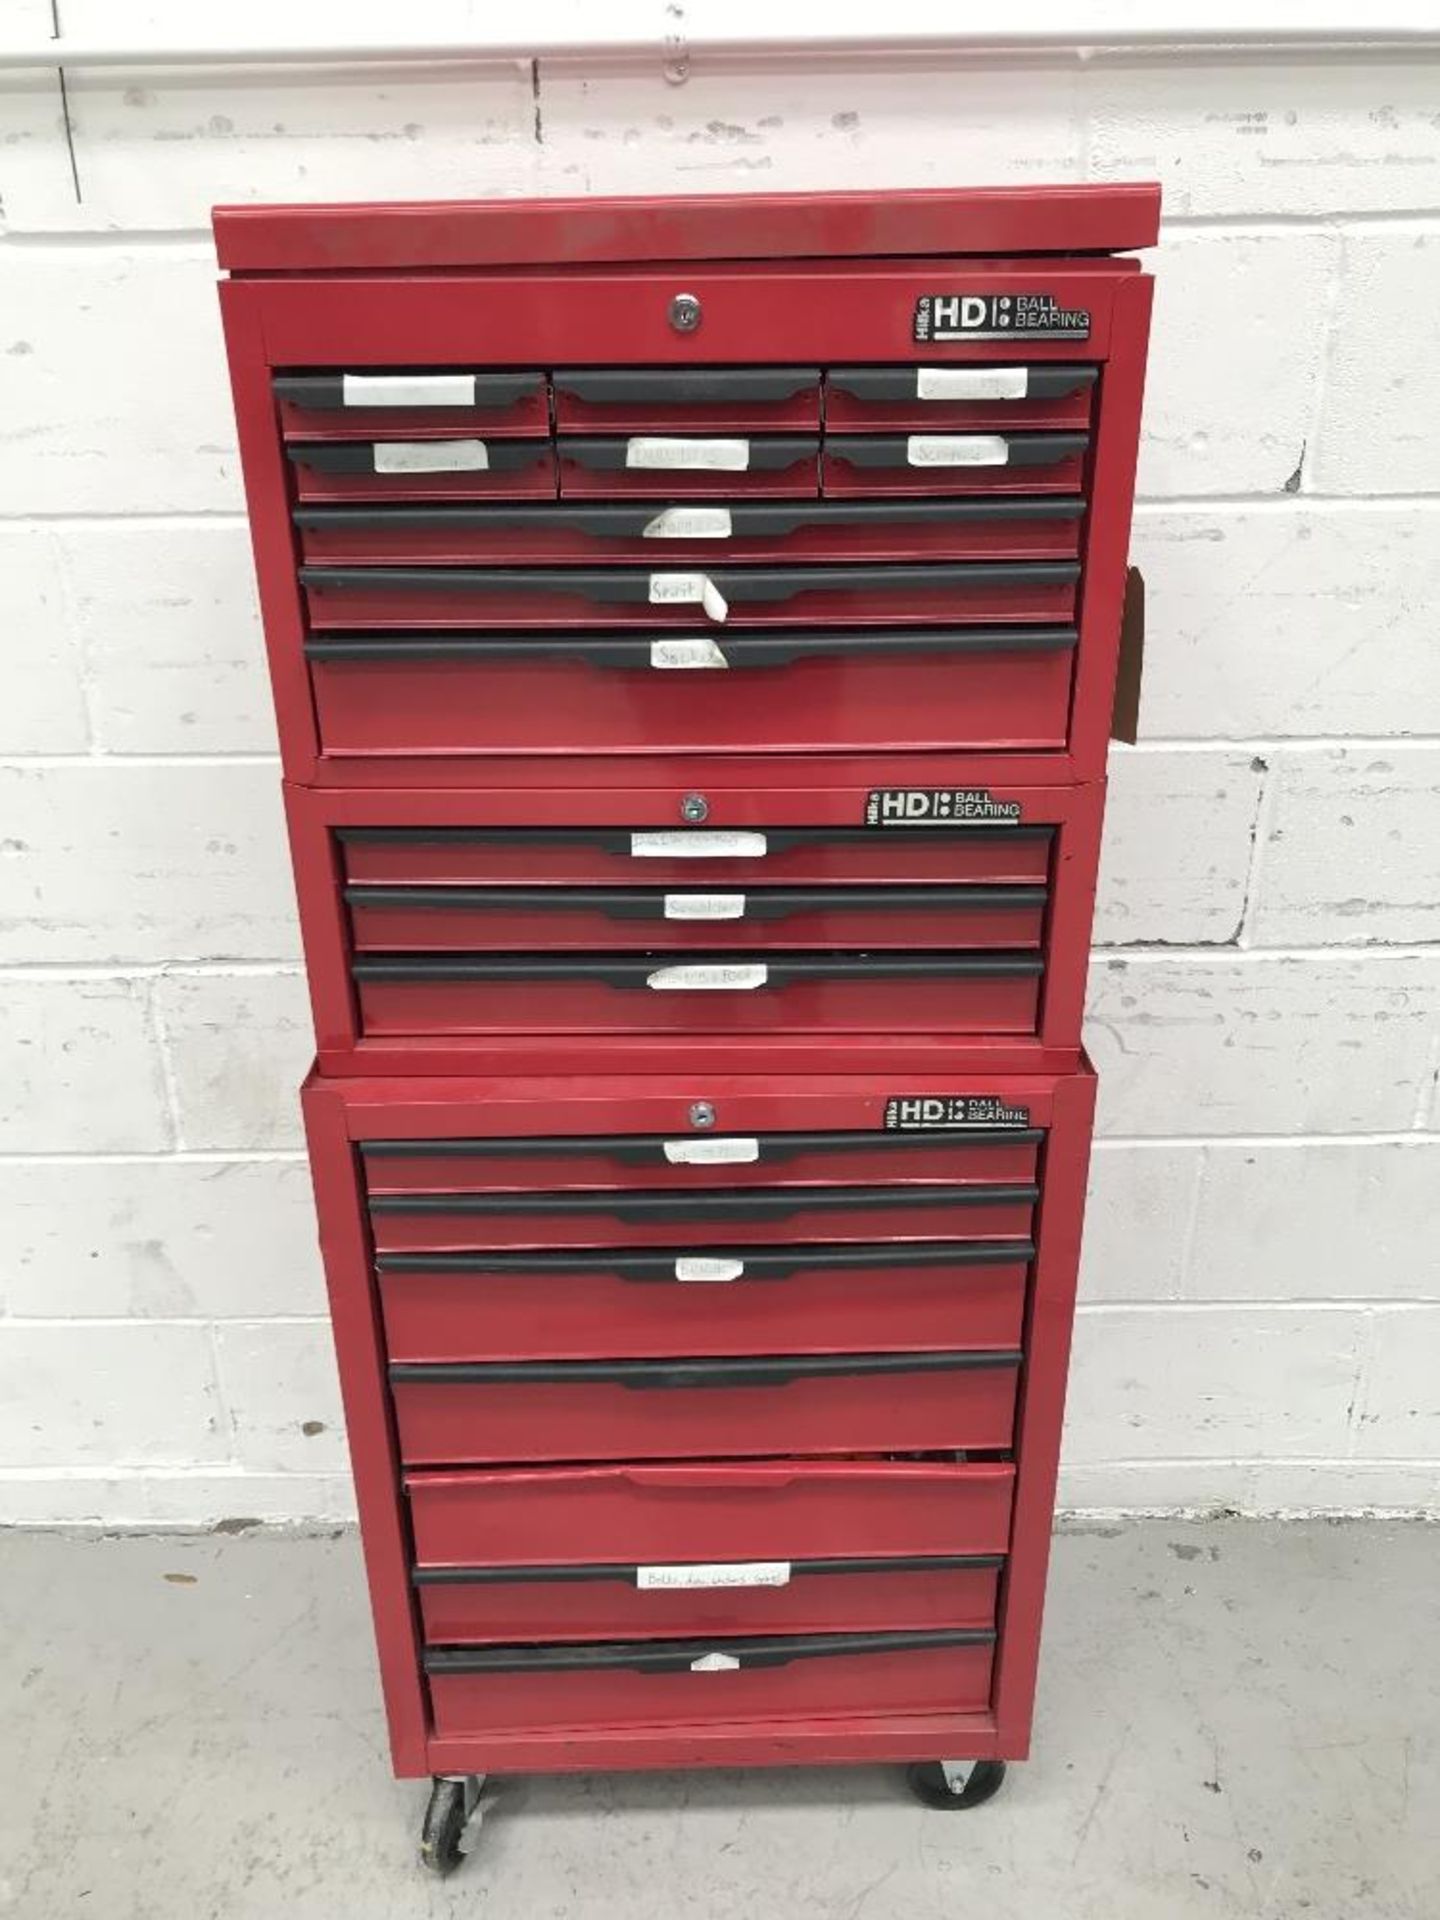 Hilka HD Ball Bearing Tool Chest and Contents